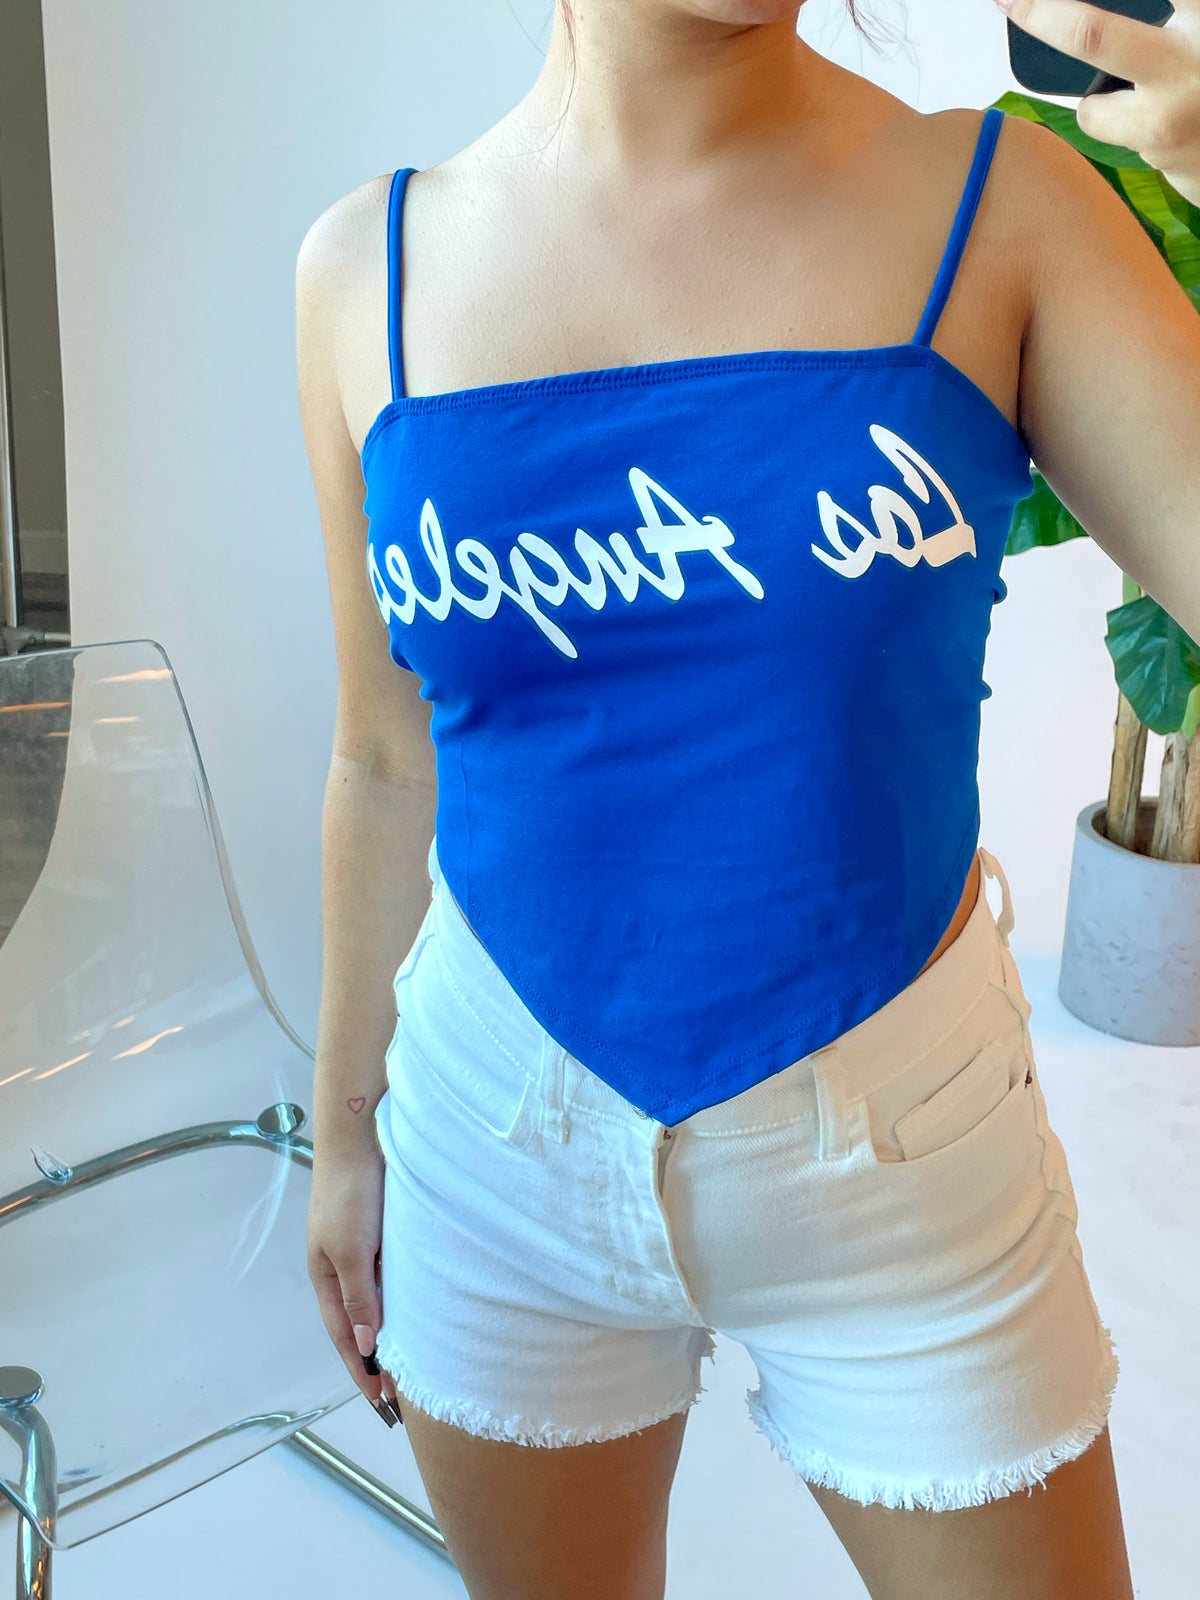 royal blue los angeles top, white font, spaghetti strap, adjustable straps, self tie back, triangle cut out